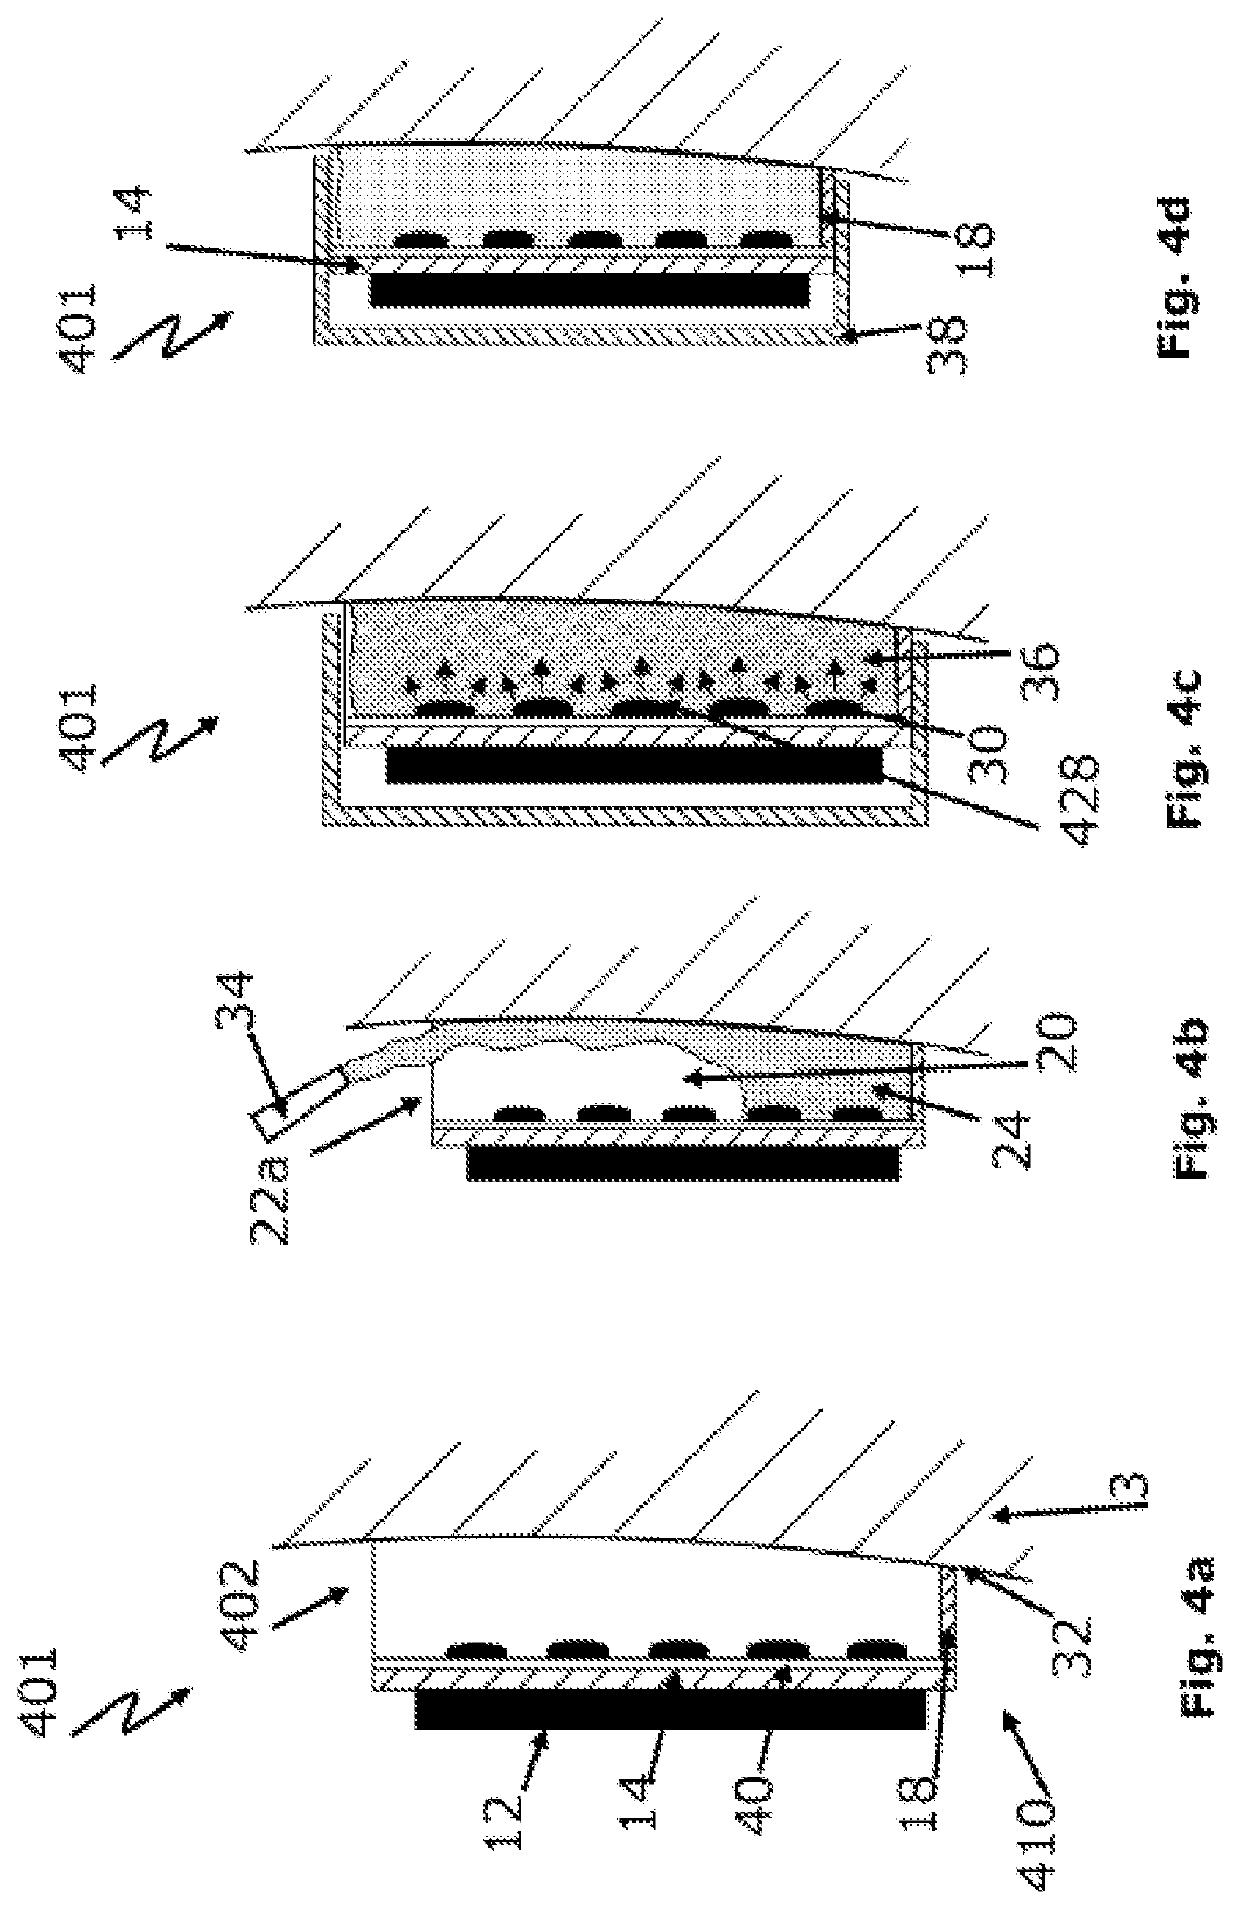 Sensor unit with fastening element for fastening to a structure